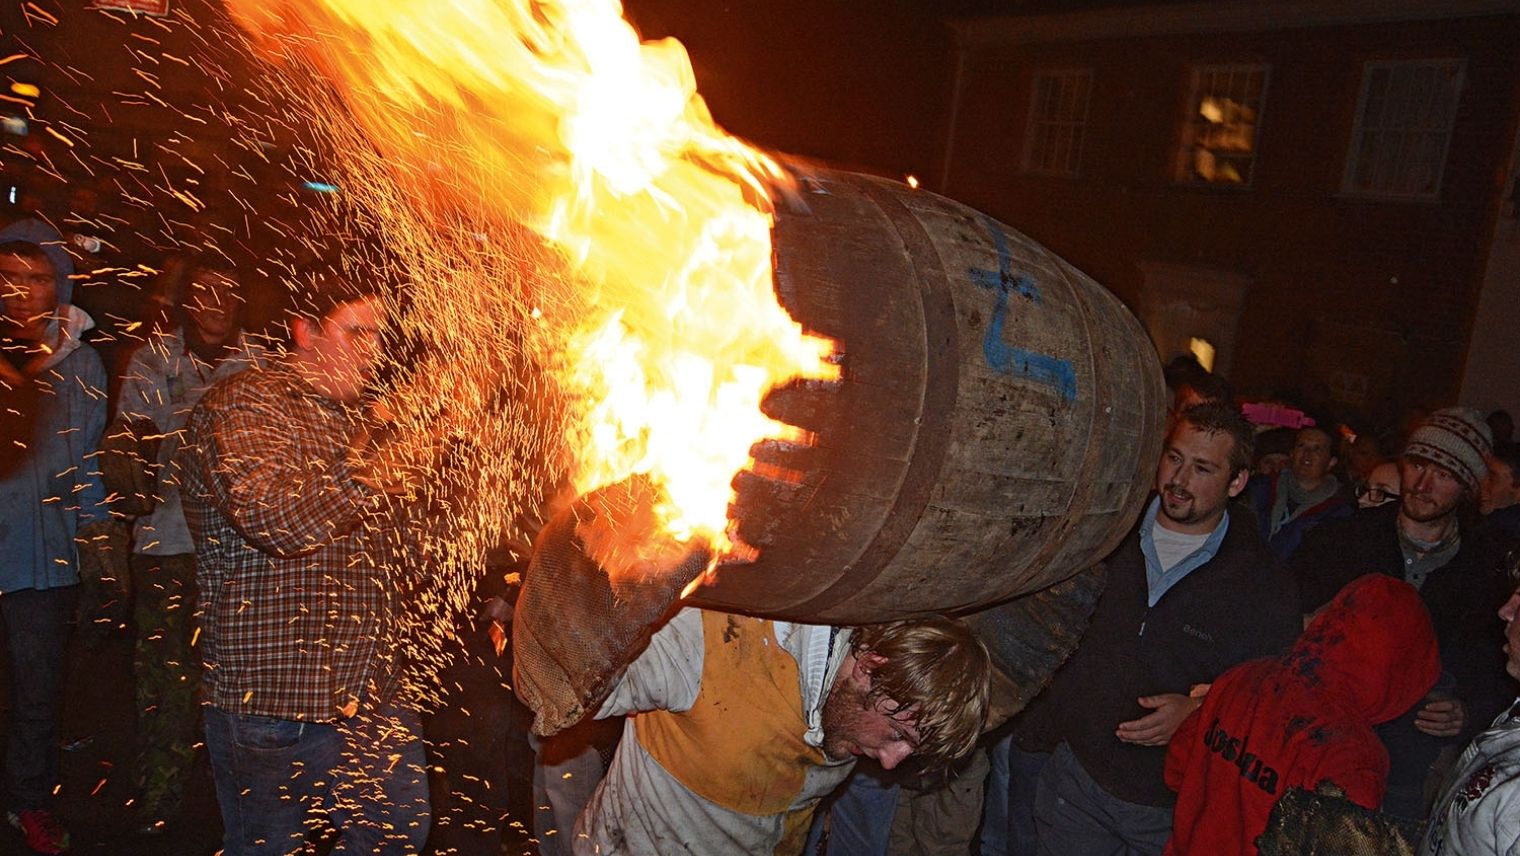 Flaming tar barrel being carried at the Ottery St Mary Tar Barrels